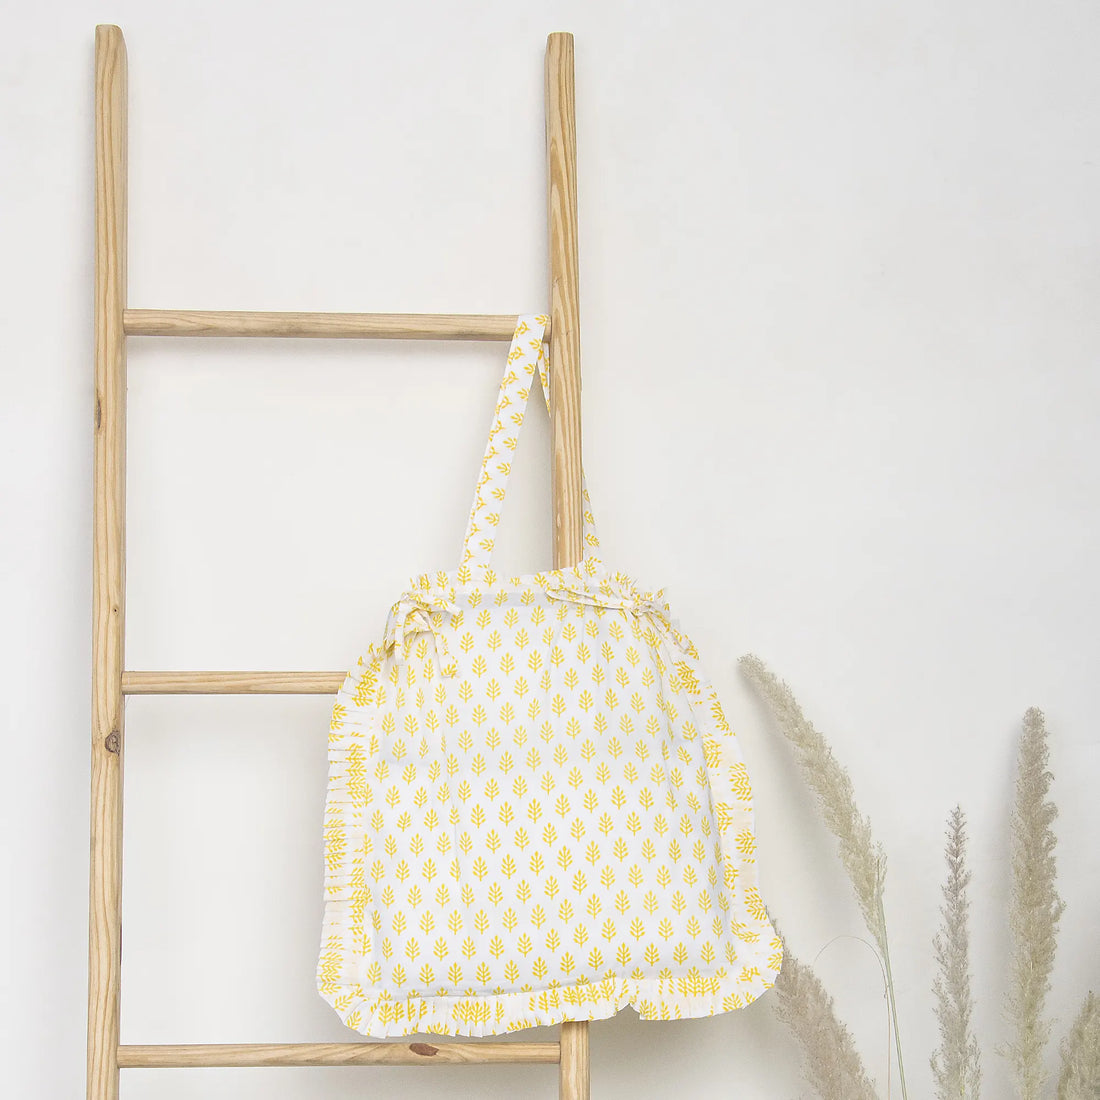 Gold Dust Print Quilted Soft Tote Bags